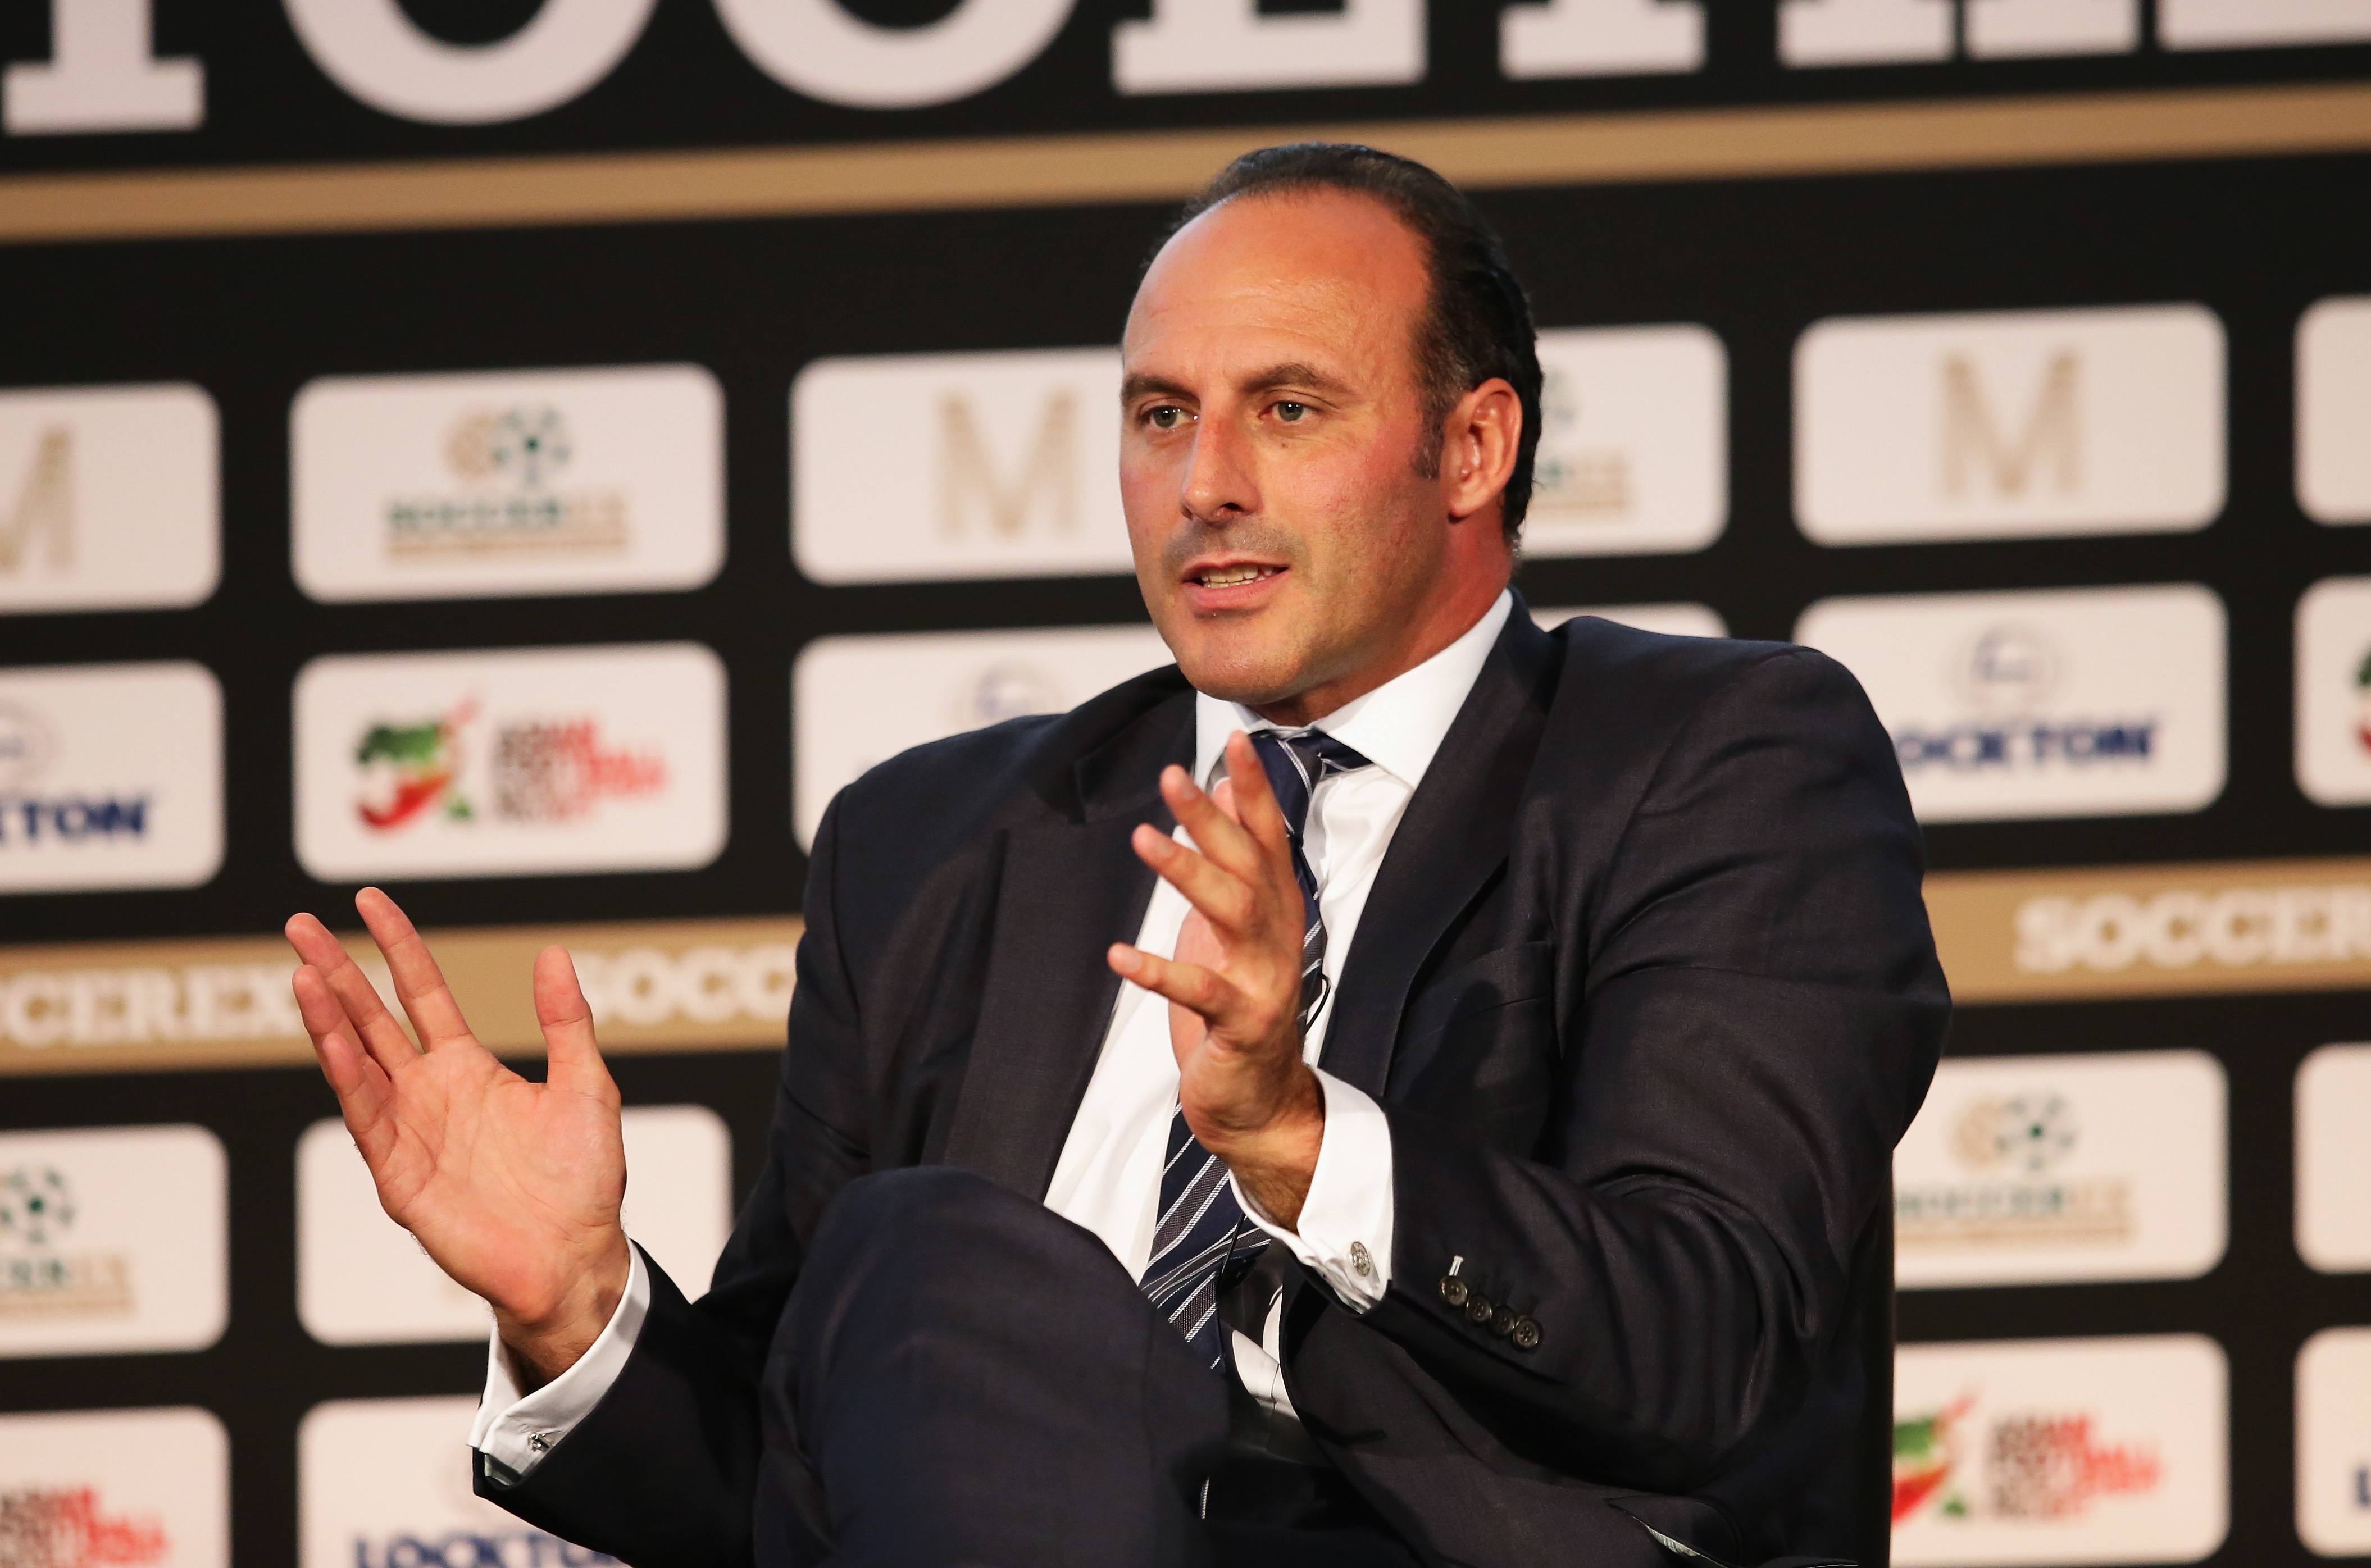 Ramon Vega: ‘I’ll return to Zurich in four years’ time as FIFA president’